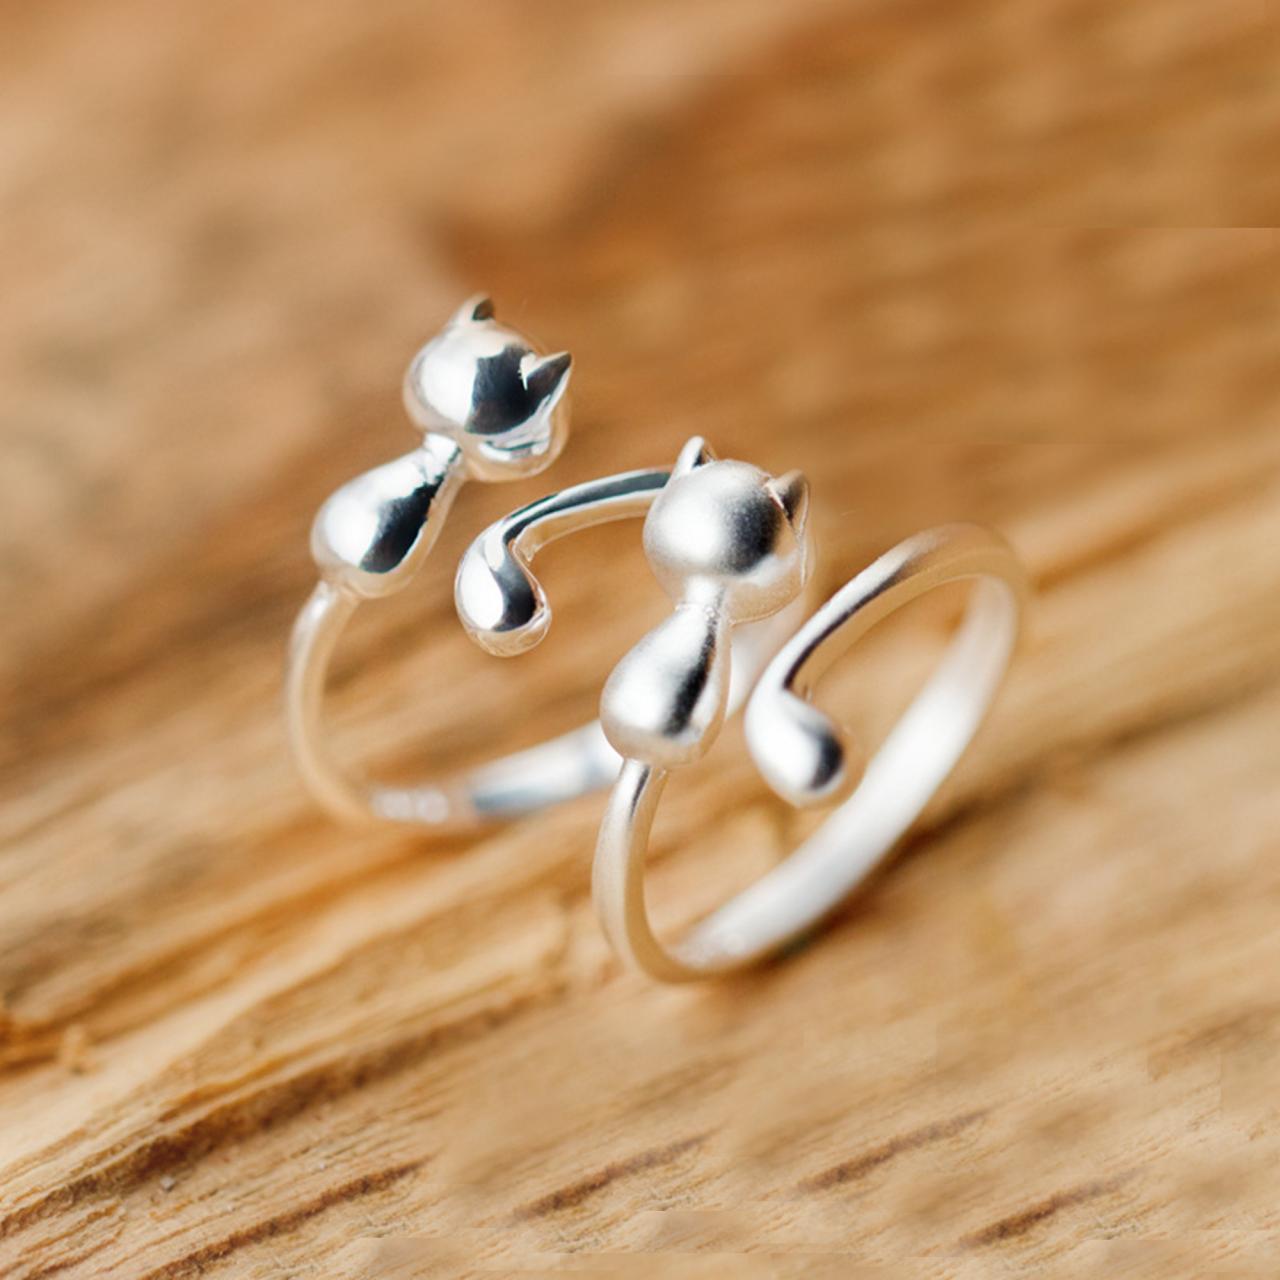 Sterling Silver Adjustable Cat Ring, Minimalist Rings, Dainty Ring, Women Ring, Everyday Jewelry